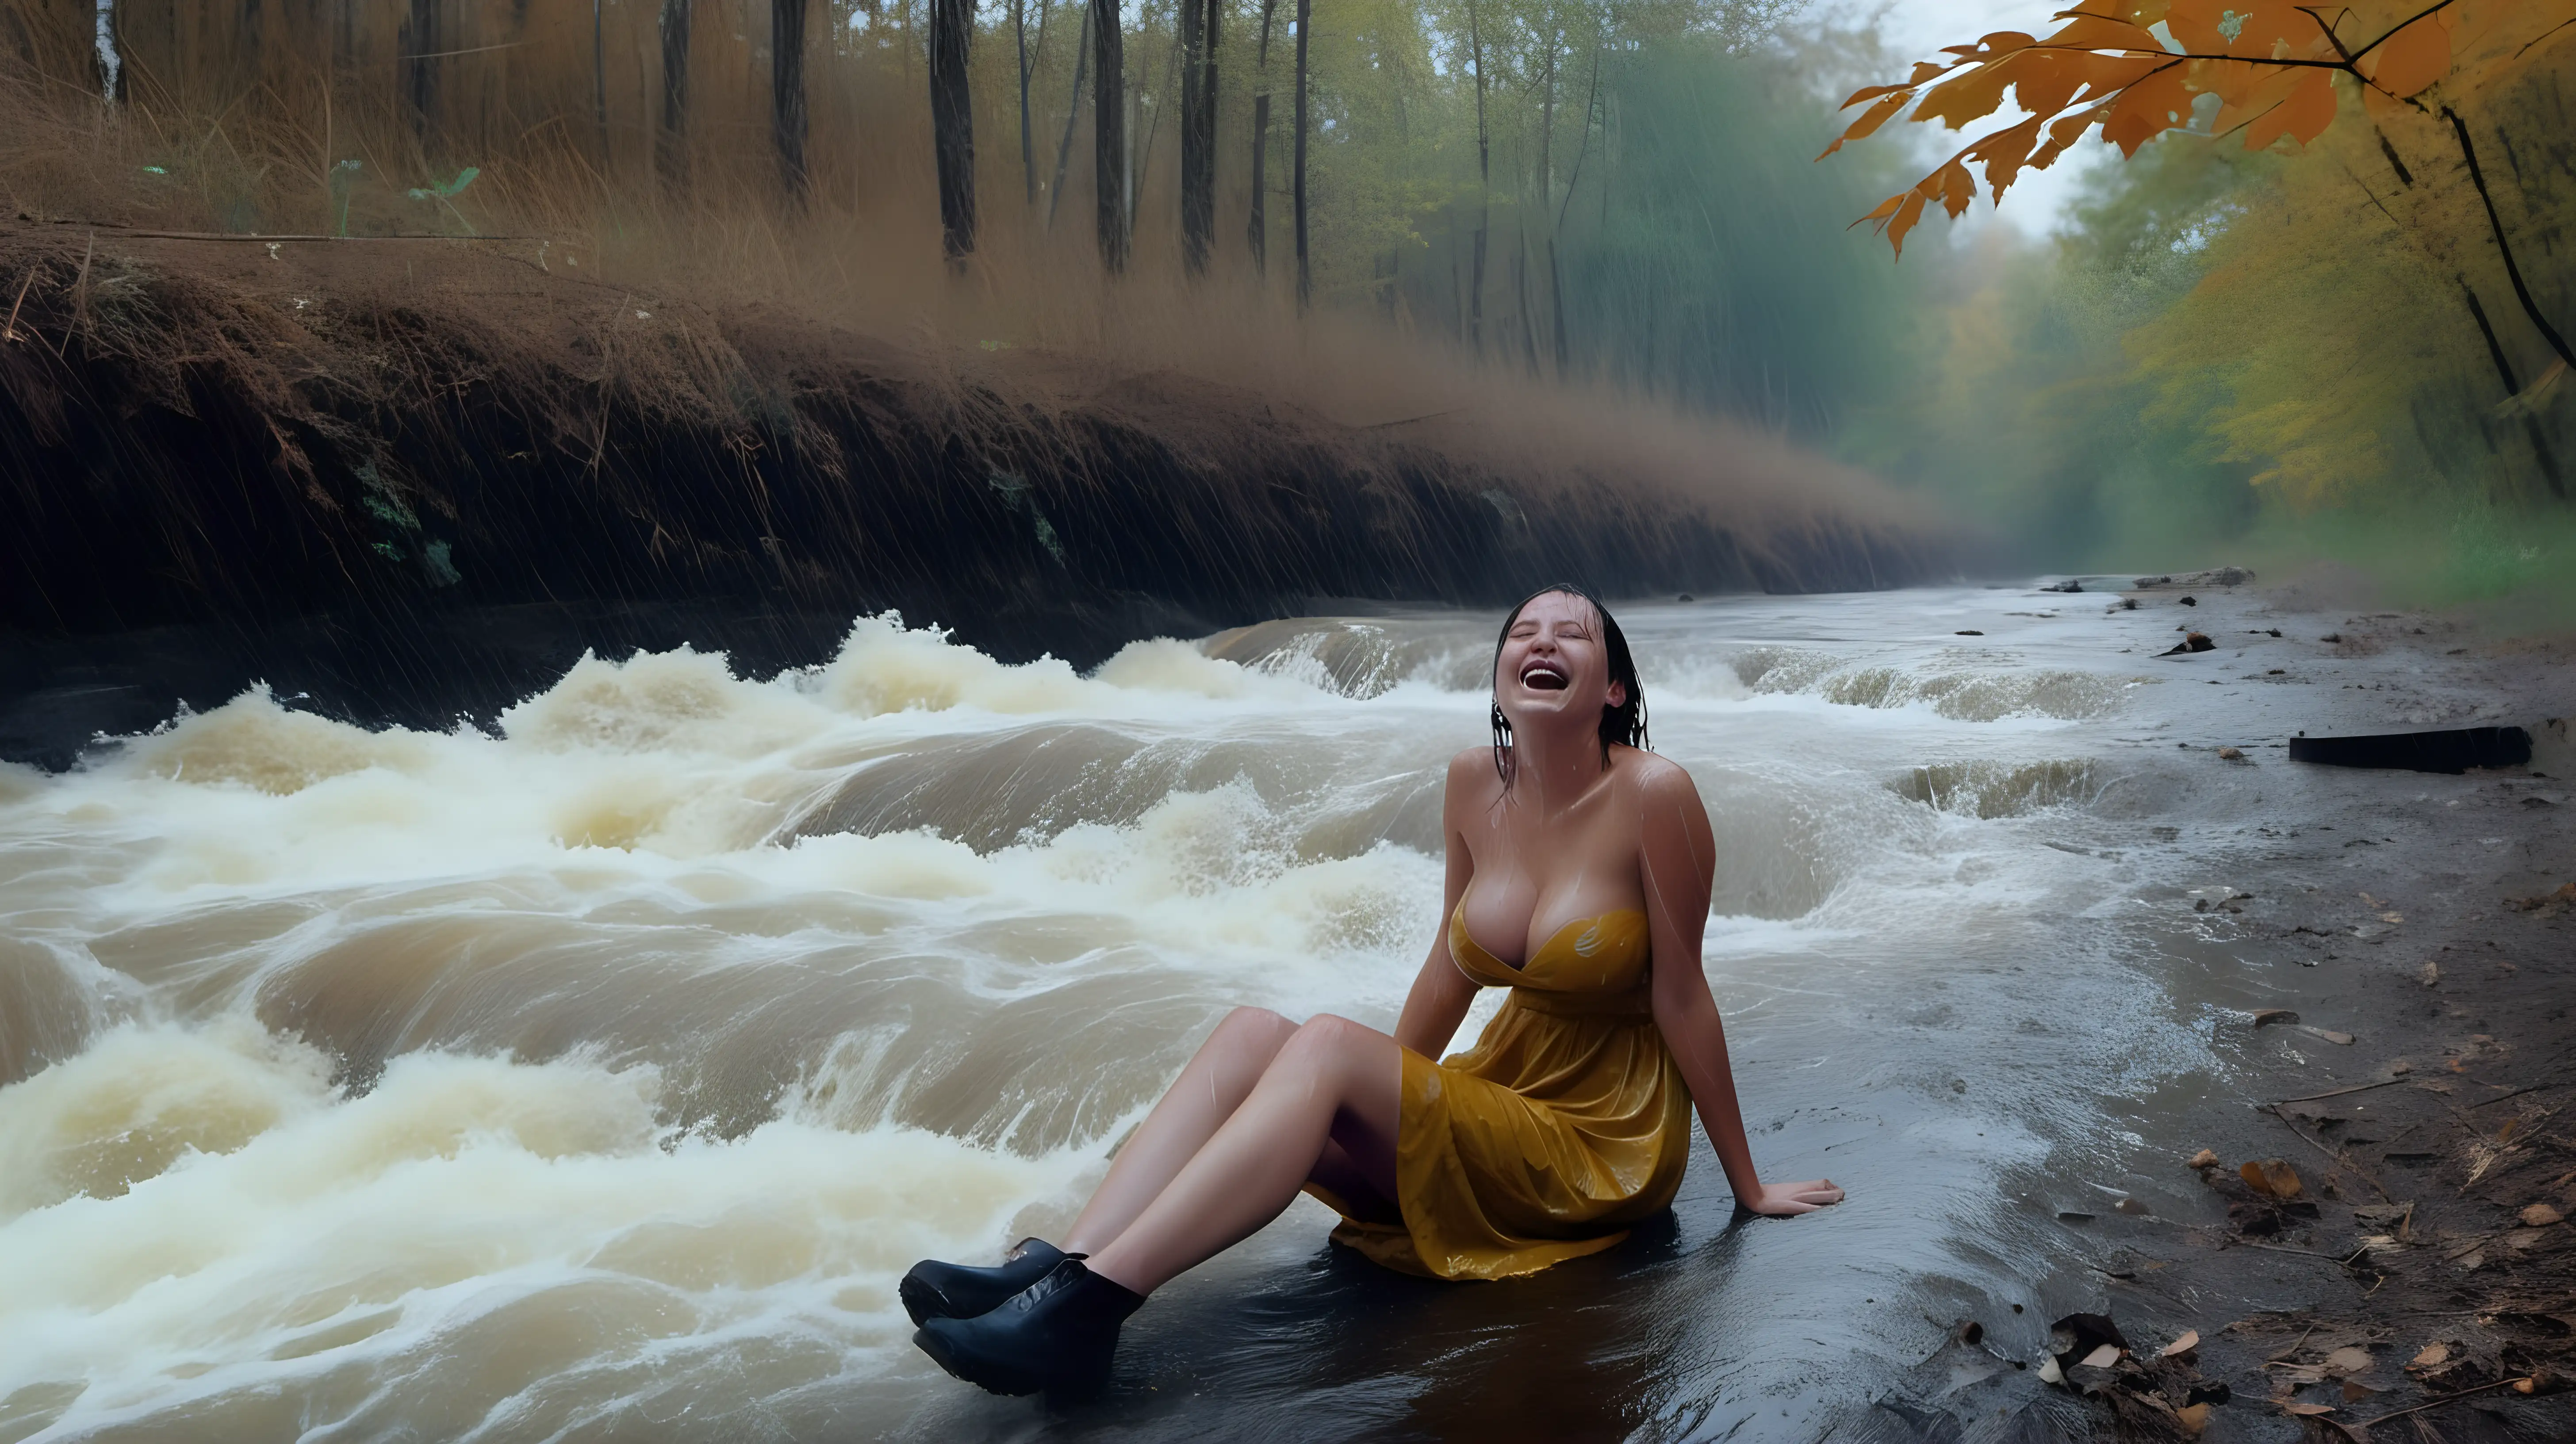 A small clearing in a forest in autumn. A whitewater river. A beautiful young woman in a wet dress sitting beside the creek. There is heavy rain. The young girl is laughing at the rain. she has full boobs.